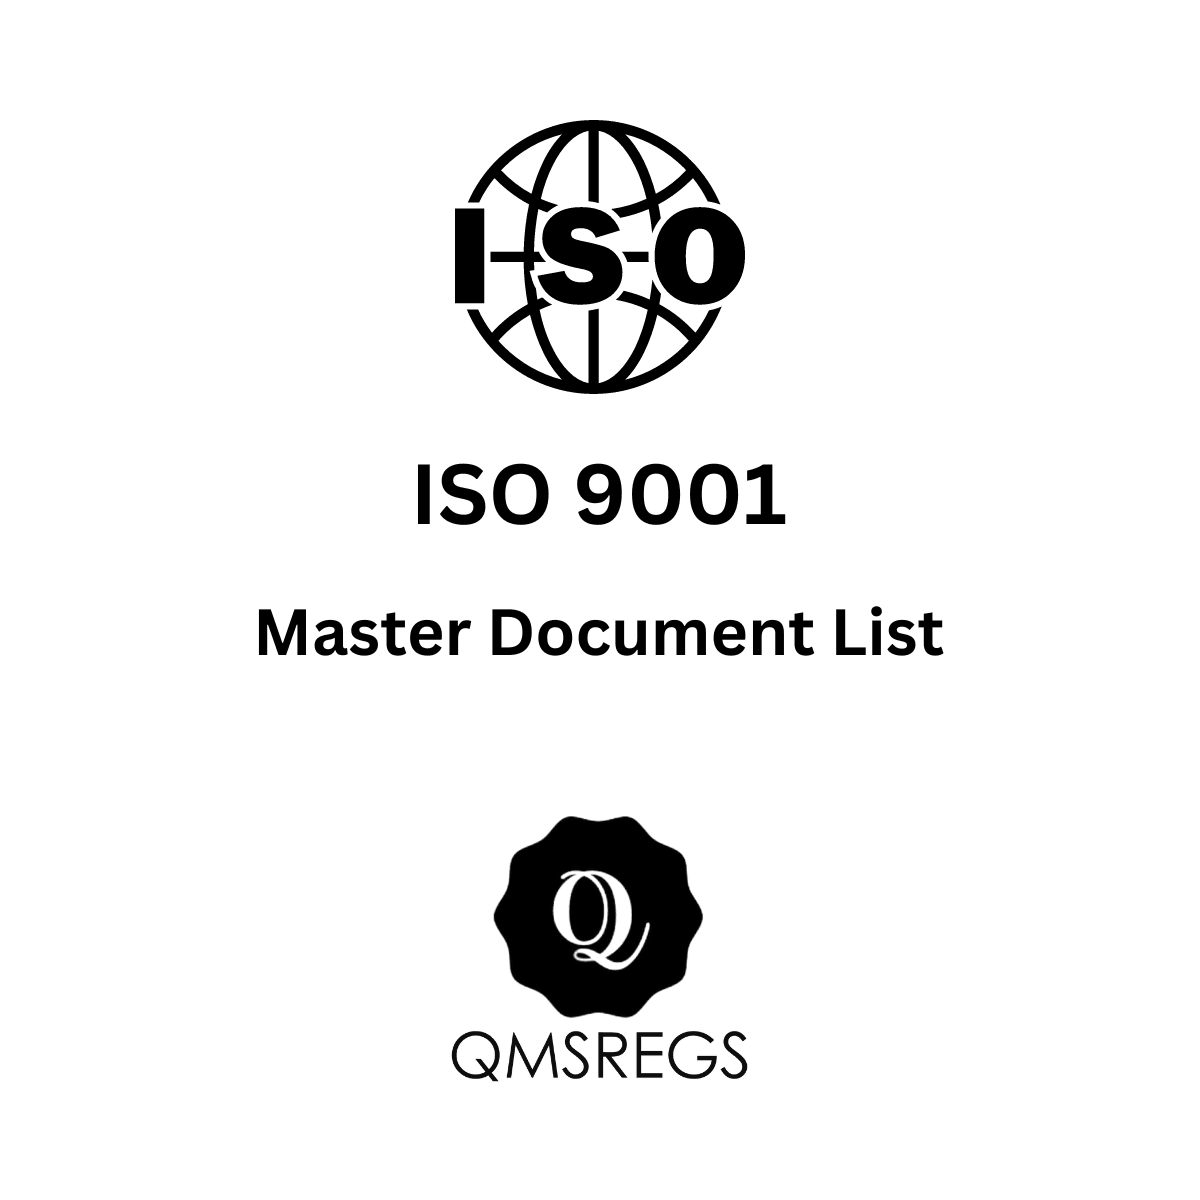 ISO 9001 Mater Document List Template